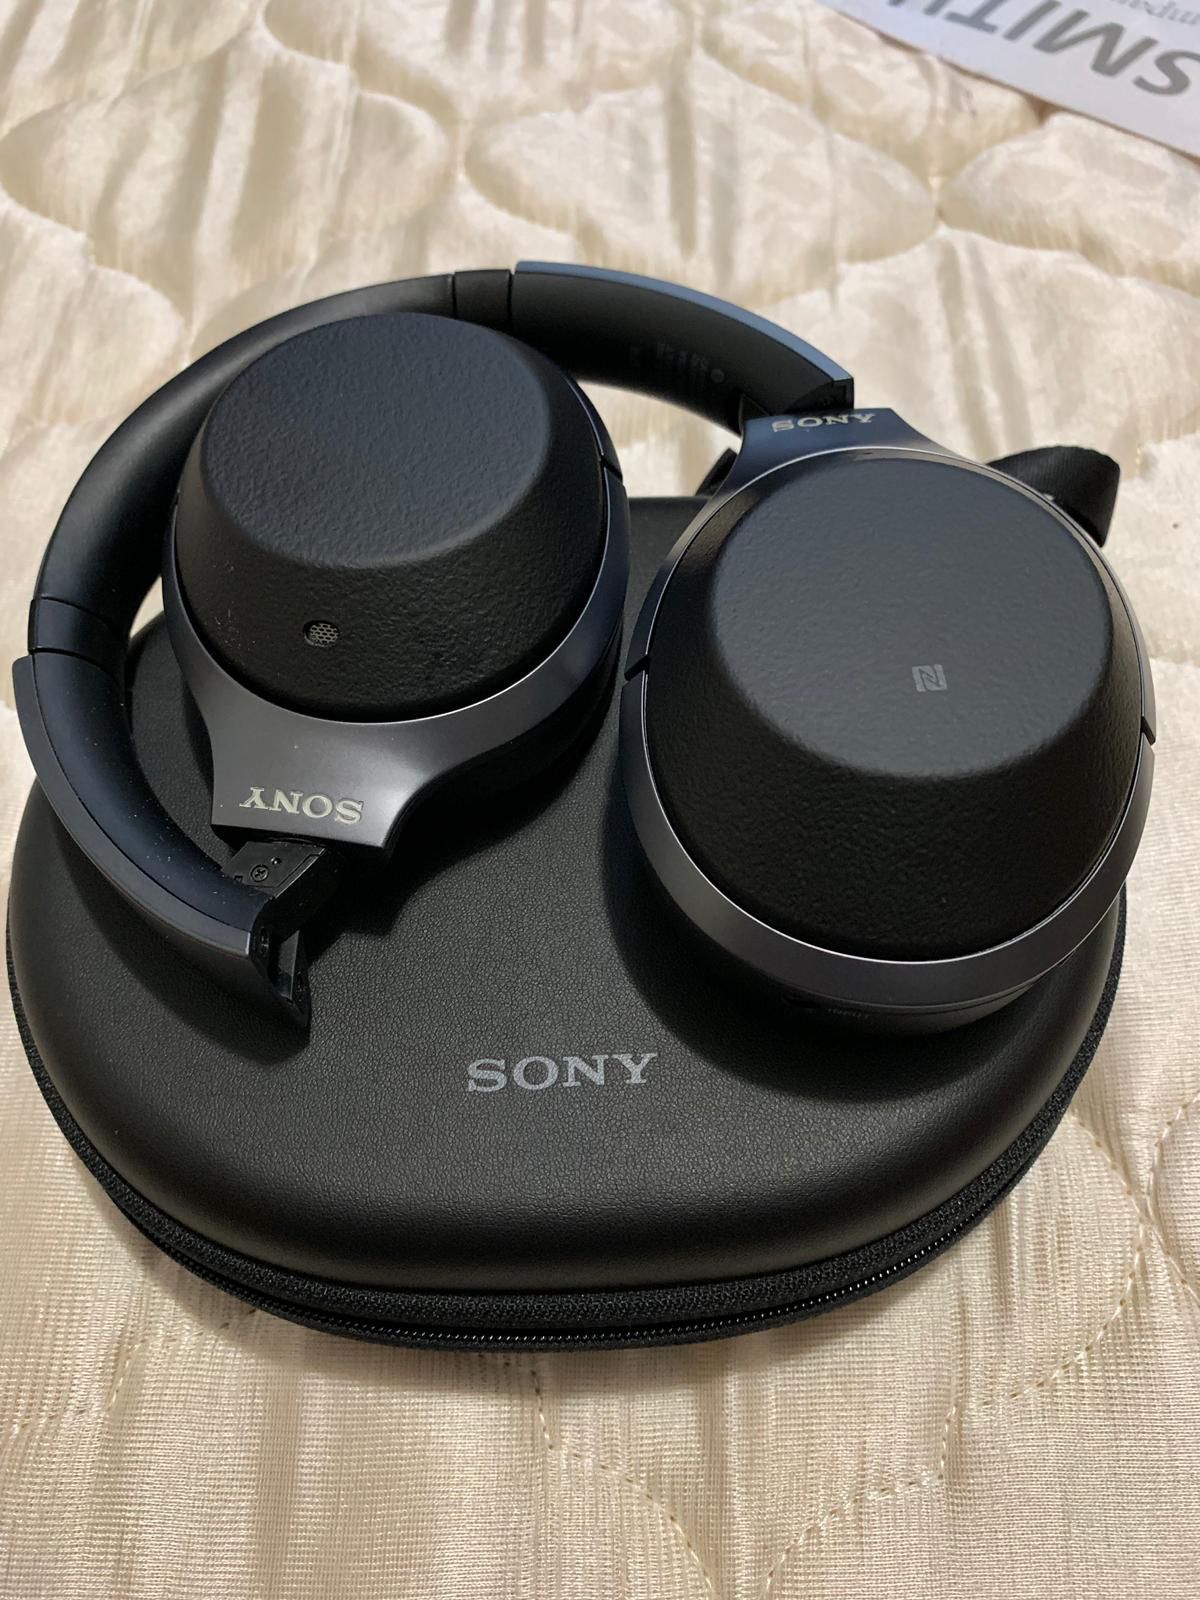 Sony Noice Cancelling headphones WH 1000XM2